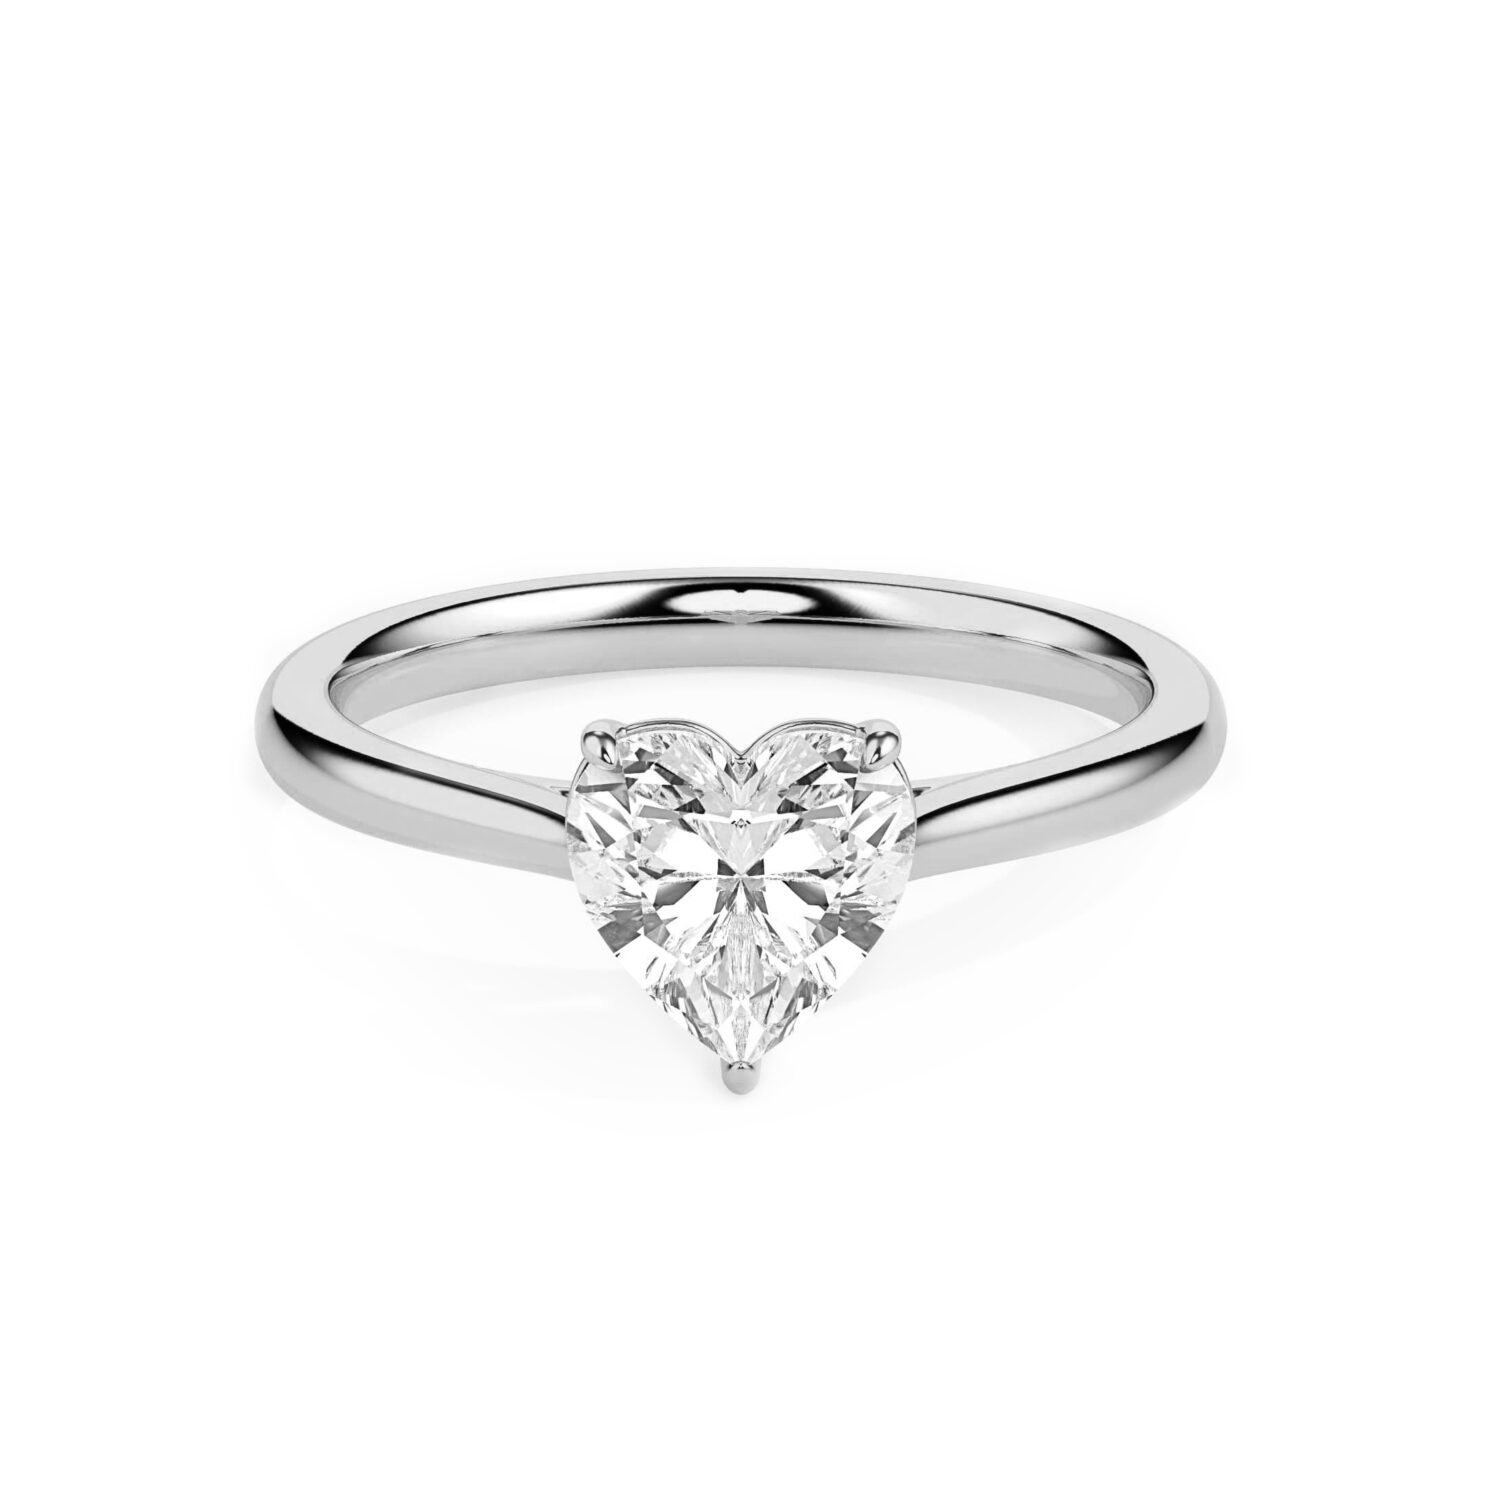 Lab grown diamonds in Cyprus - The Heart 0.5 to 5ct Diamond Solitaire Engagement Ring best quality and price